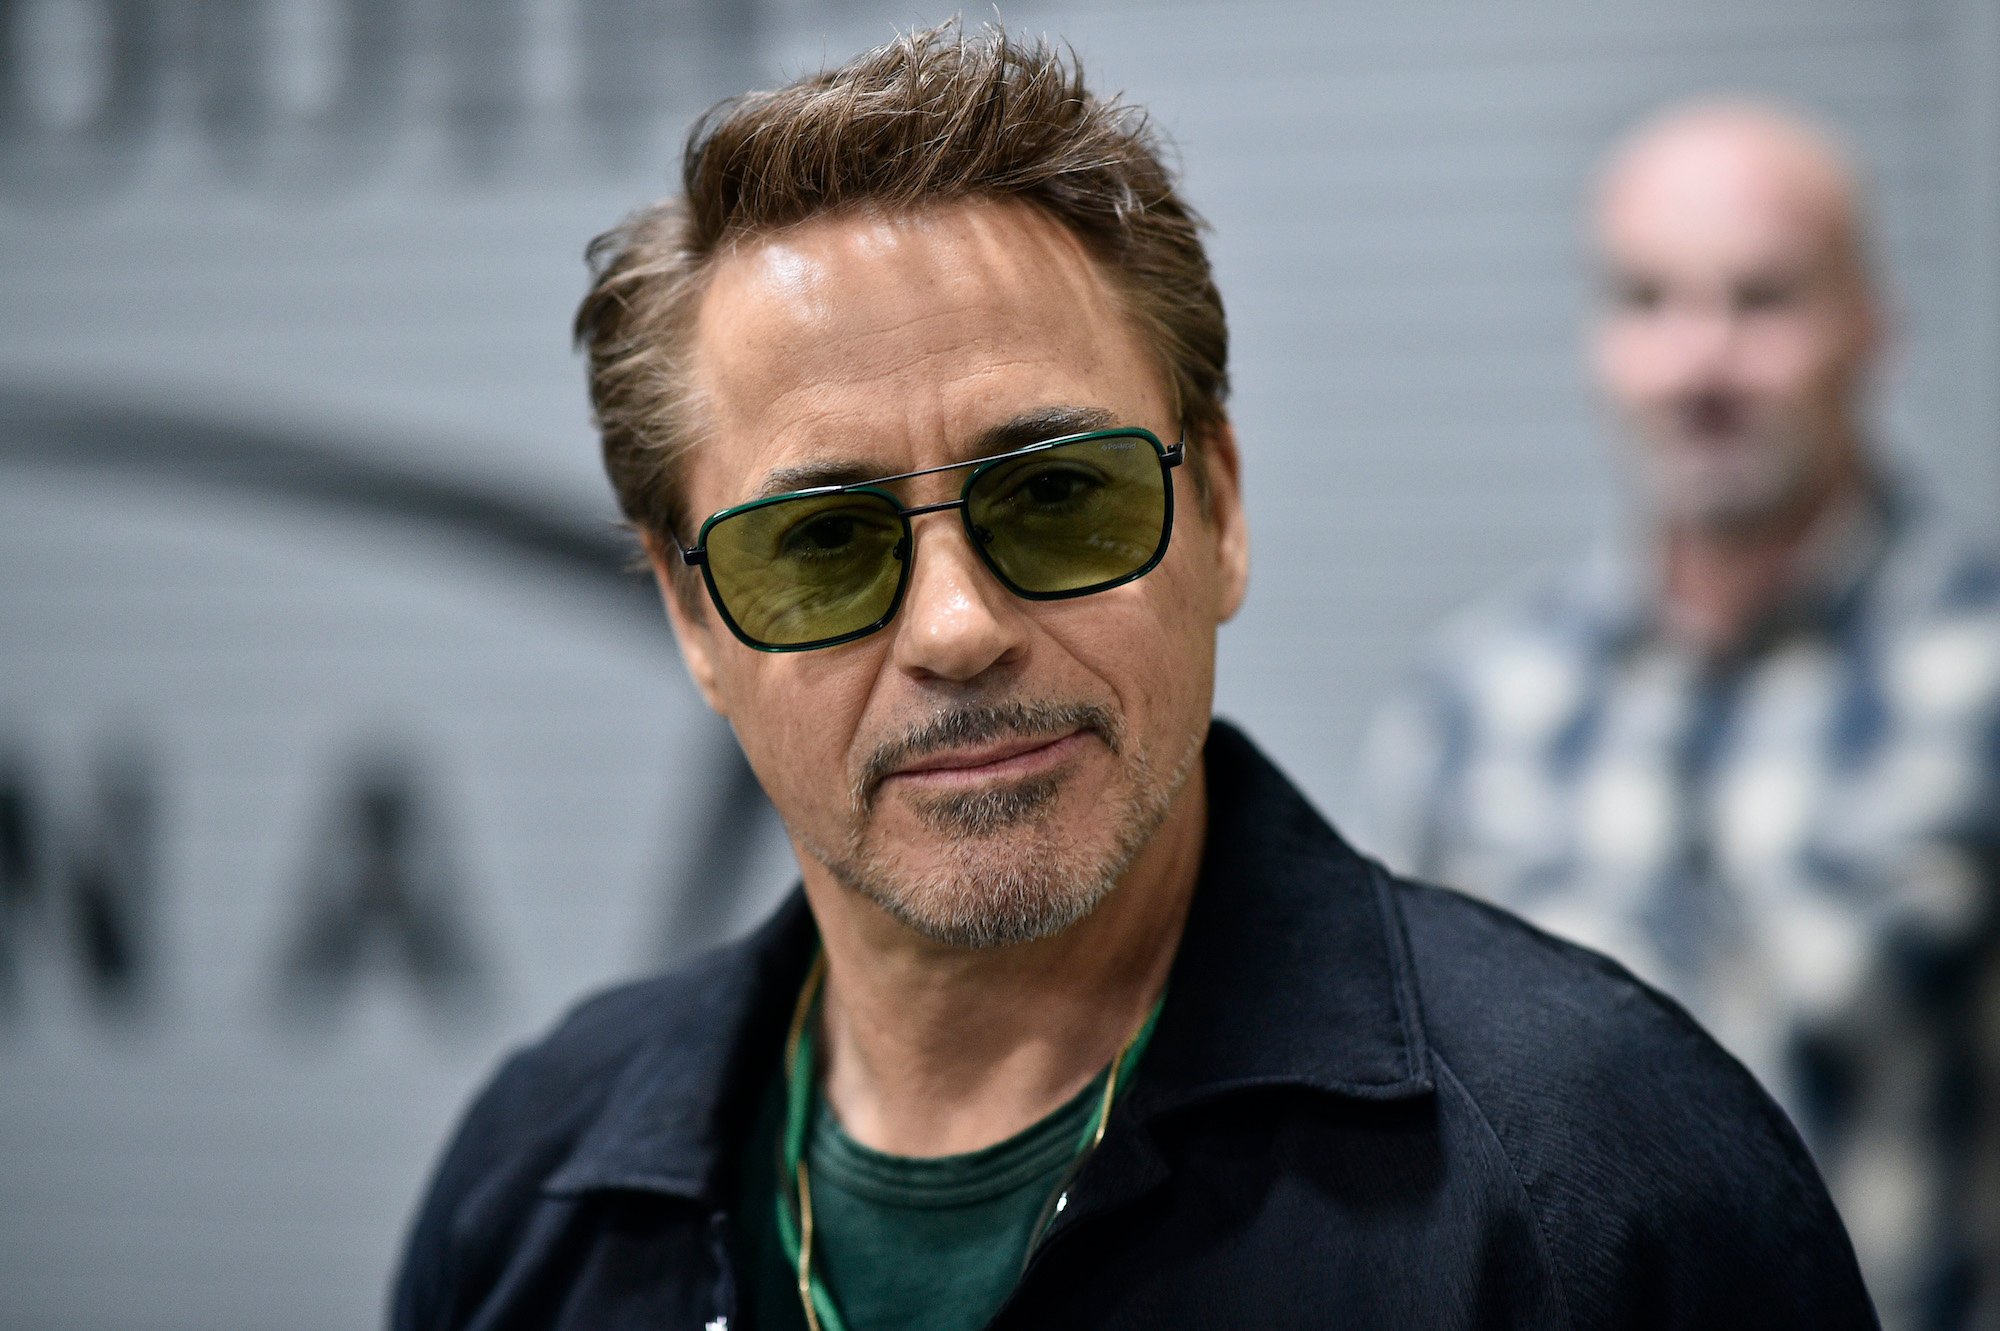 Avengers: Endgame': Tony's Funeral Hinted at a Possible New Future Superhero